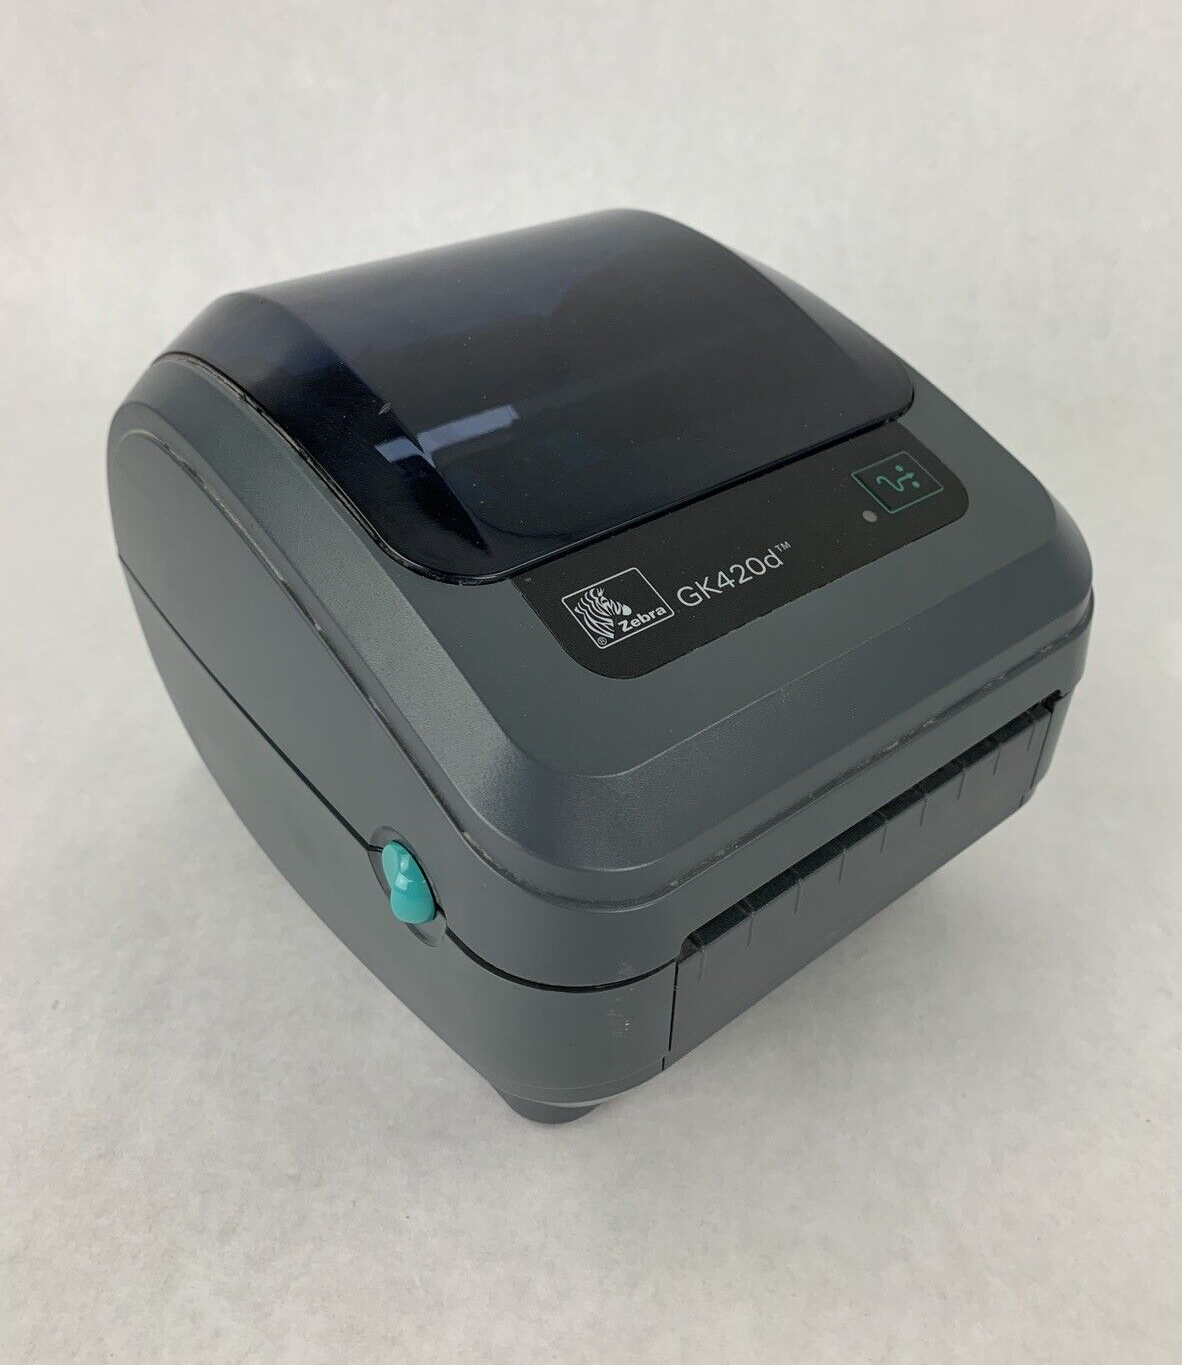 Zebra GK420d Thermal Label Printer Tested Bad Ports For Parts and Repair